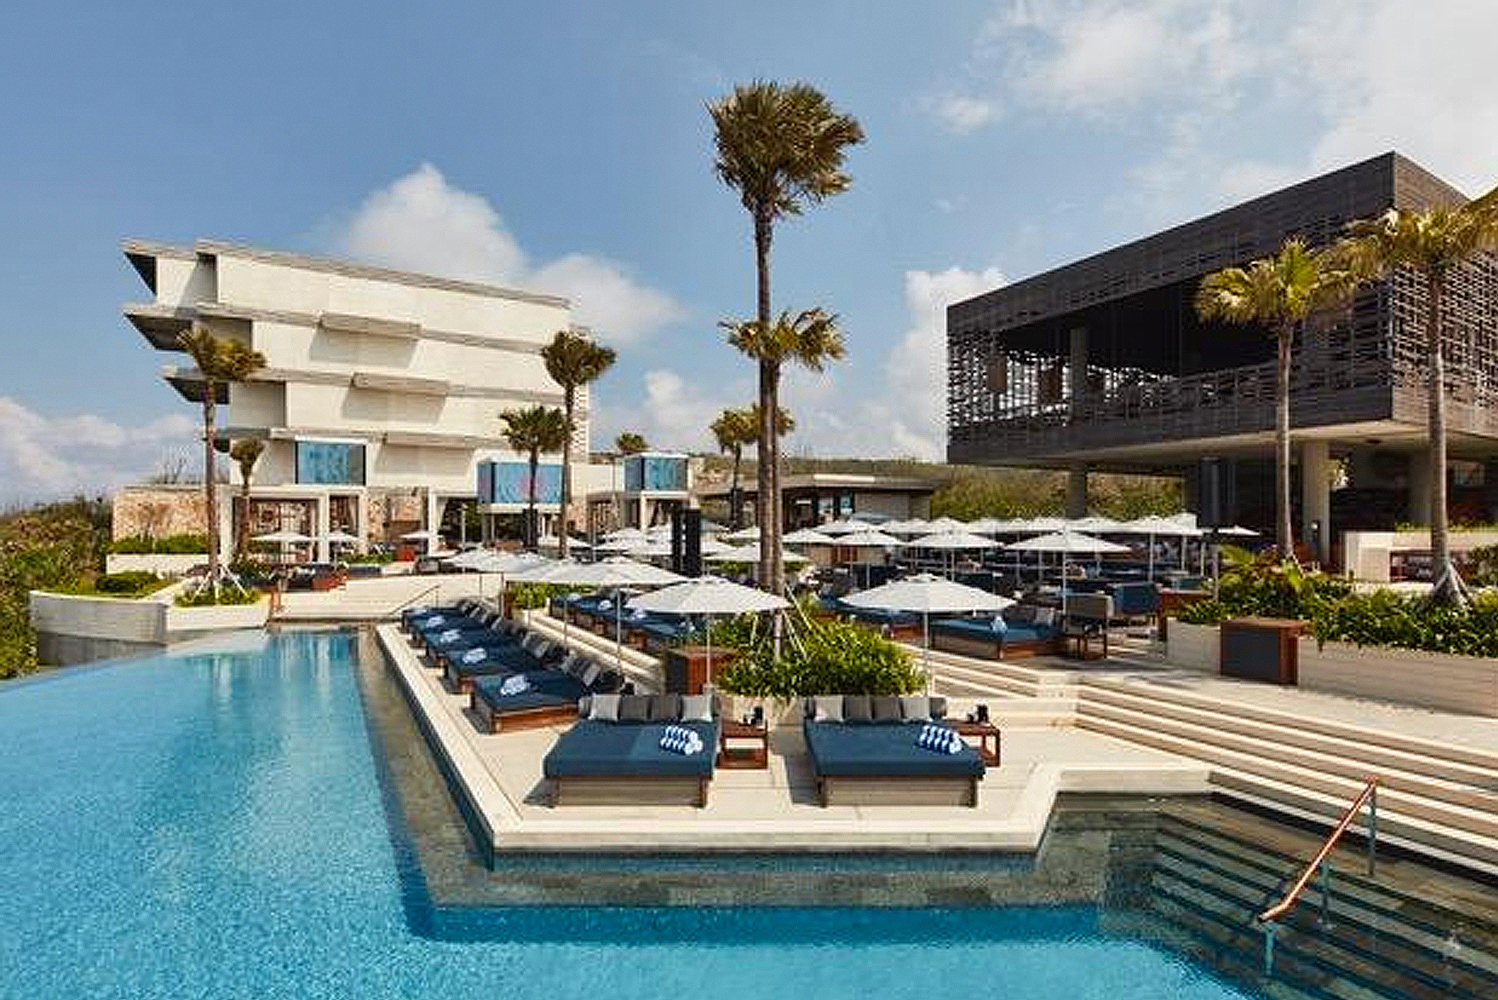 Rockwell Group completed the design of the worlds first OMNIA Dayclub and a luxury Japanese restaurant Sake No Hana at The